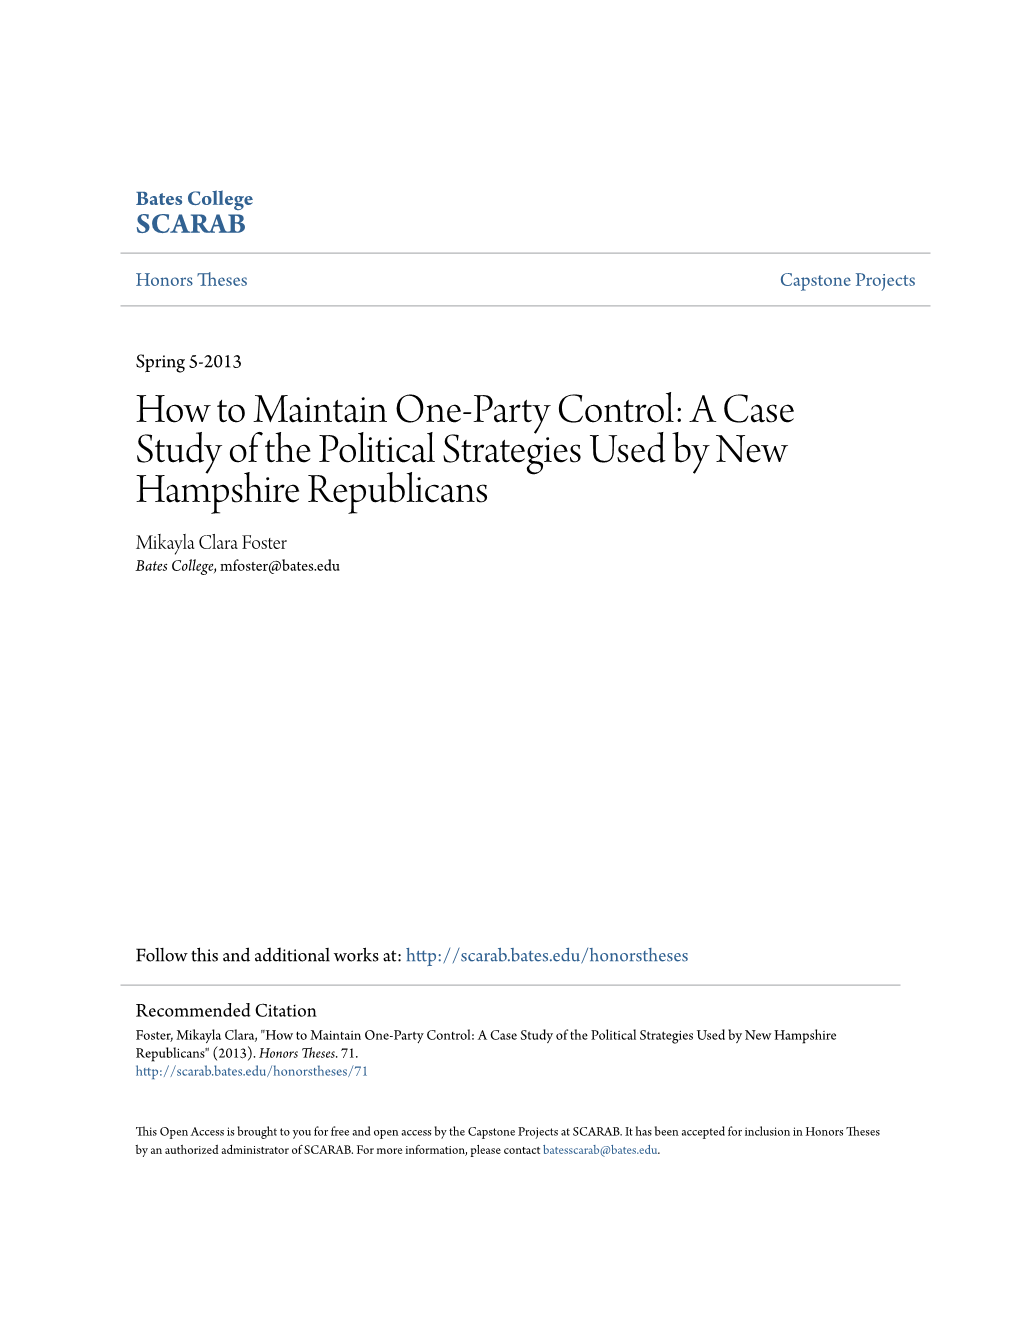 How to Maintain One-Party Control: a Case Study of the Political Strategies Used by New Hampshire Republicans Mikayla Clara Foster Bates College, Mfoster@Bates.Edu